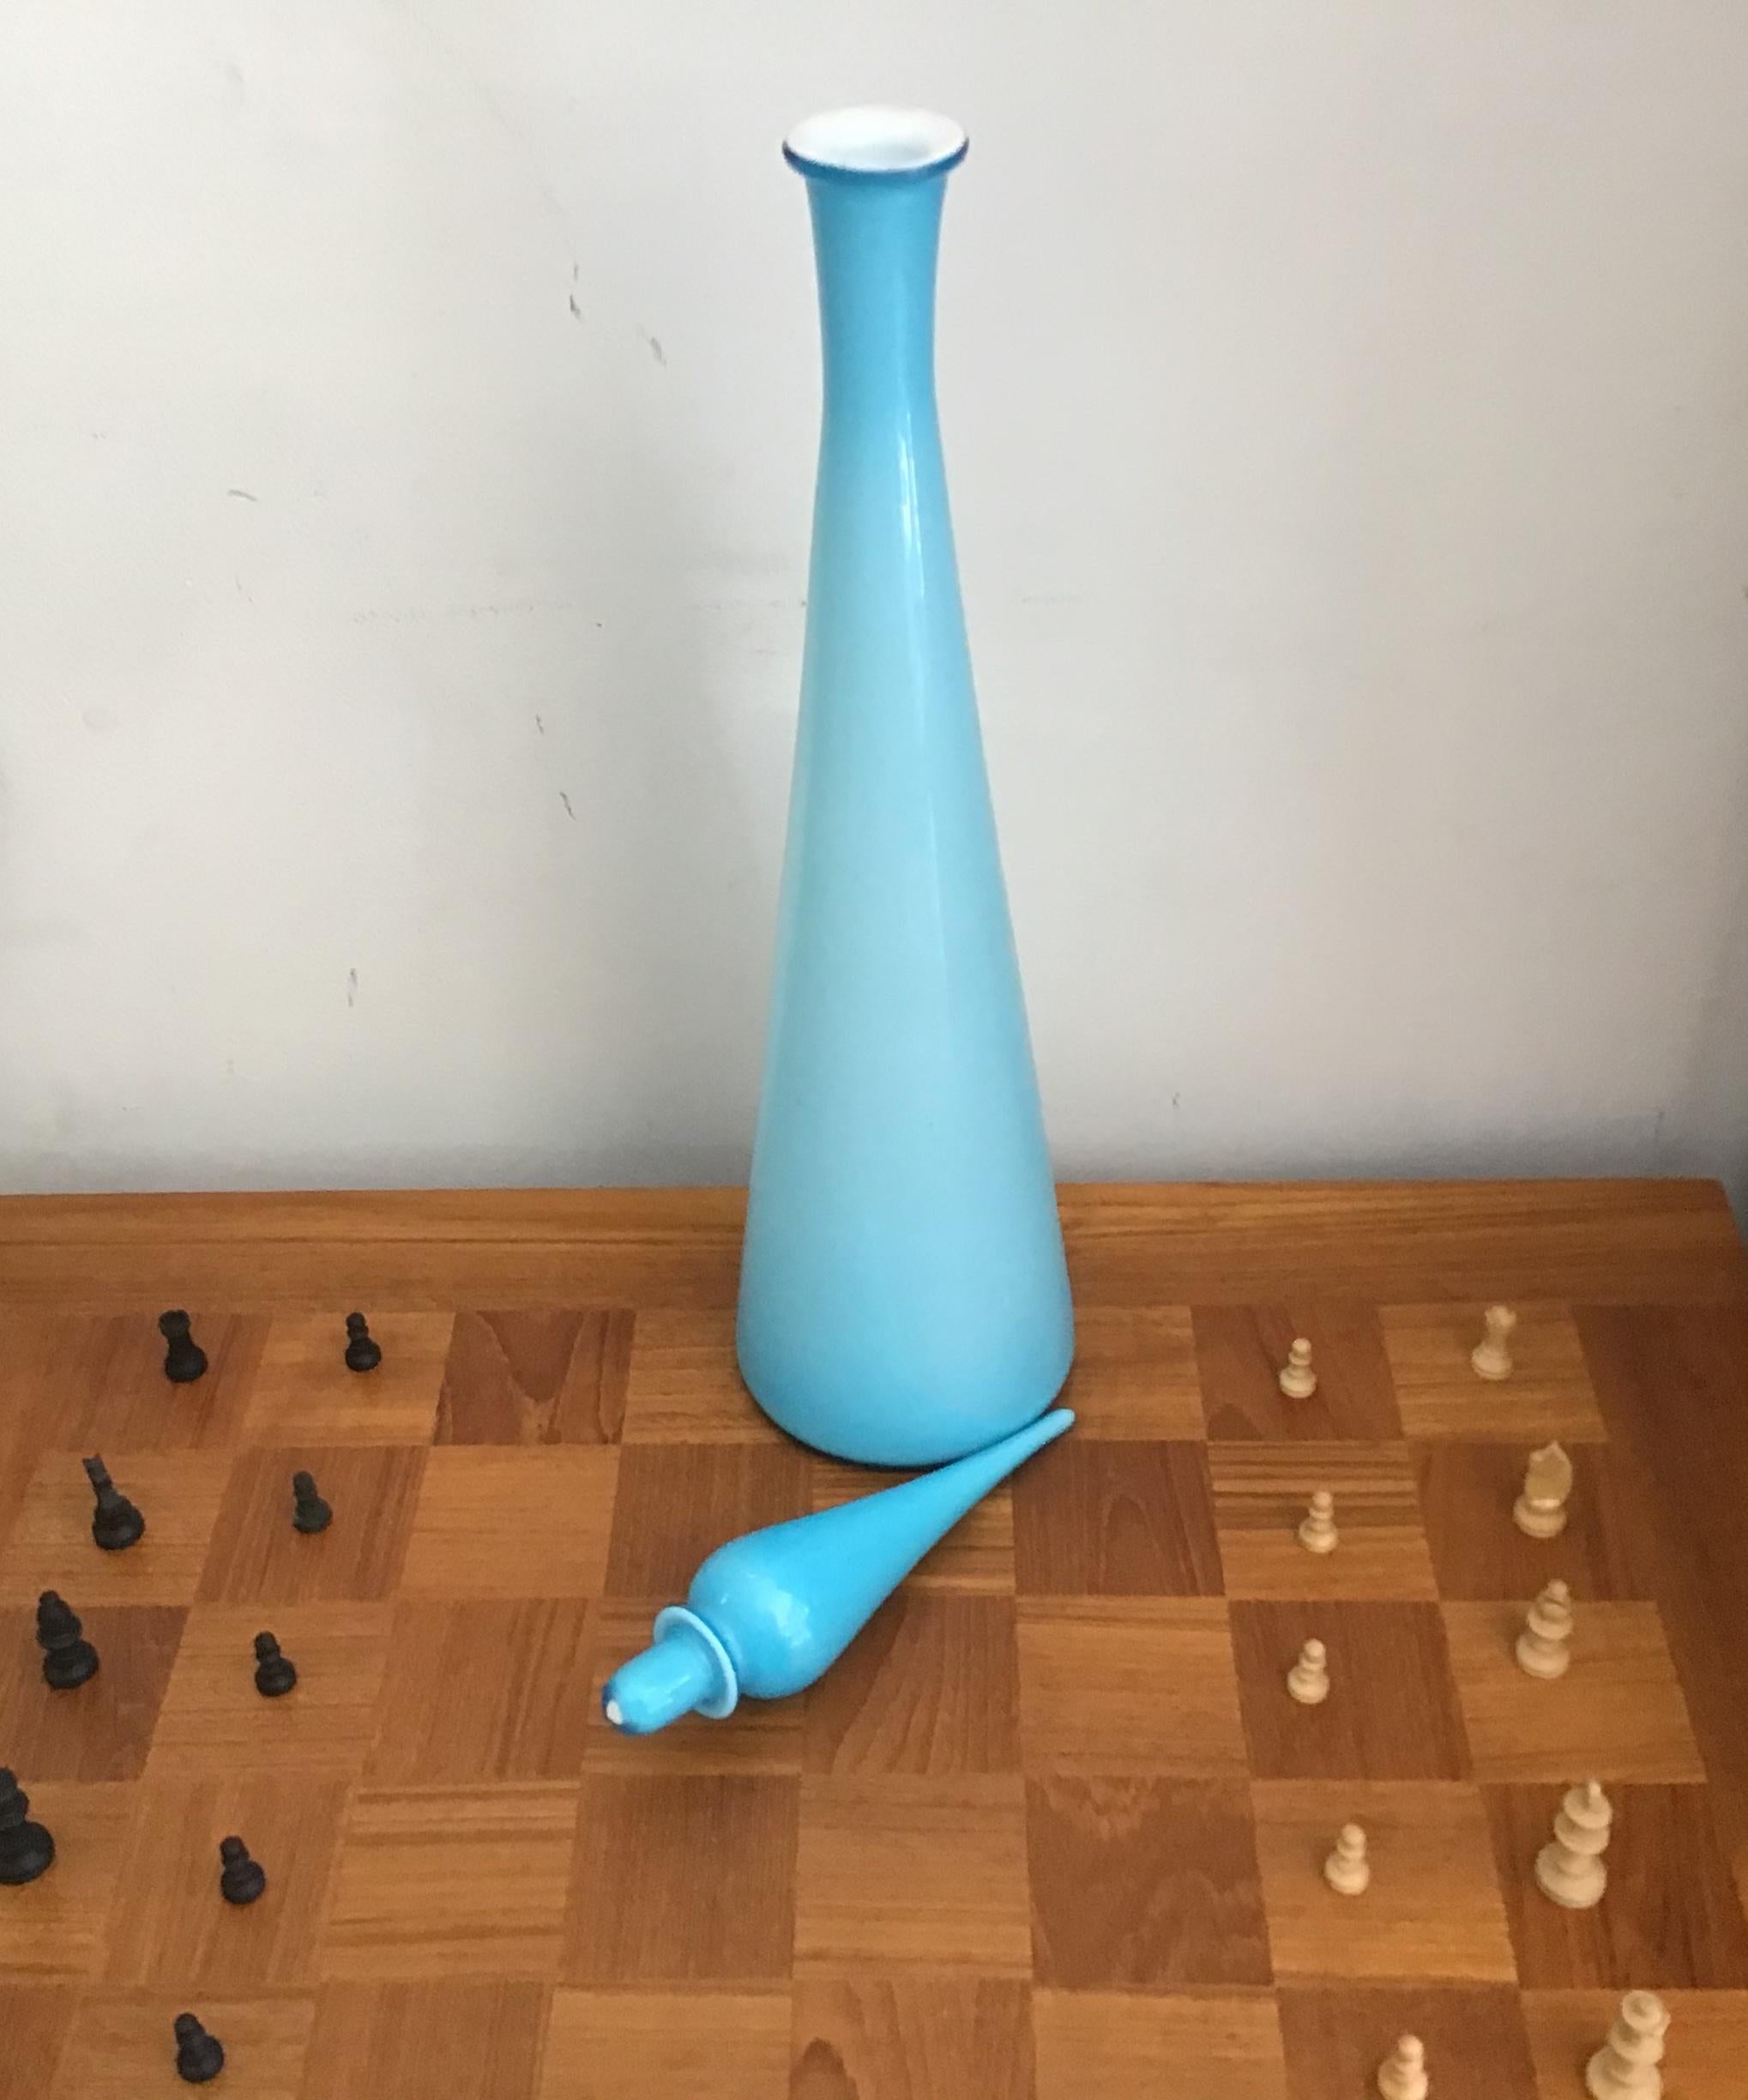 A fantastic extra large pale turquoise (or pale cyan or bright baby blue) colored Empoli genie bottle/decanter. Unusually it's cased with white inside so it's not transparent. 

Vintage, circa 1960s, most likely from Empoli, Italy.
Dimensions